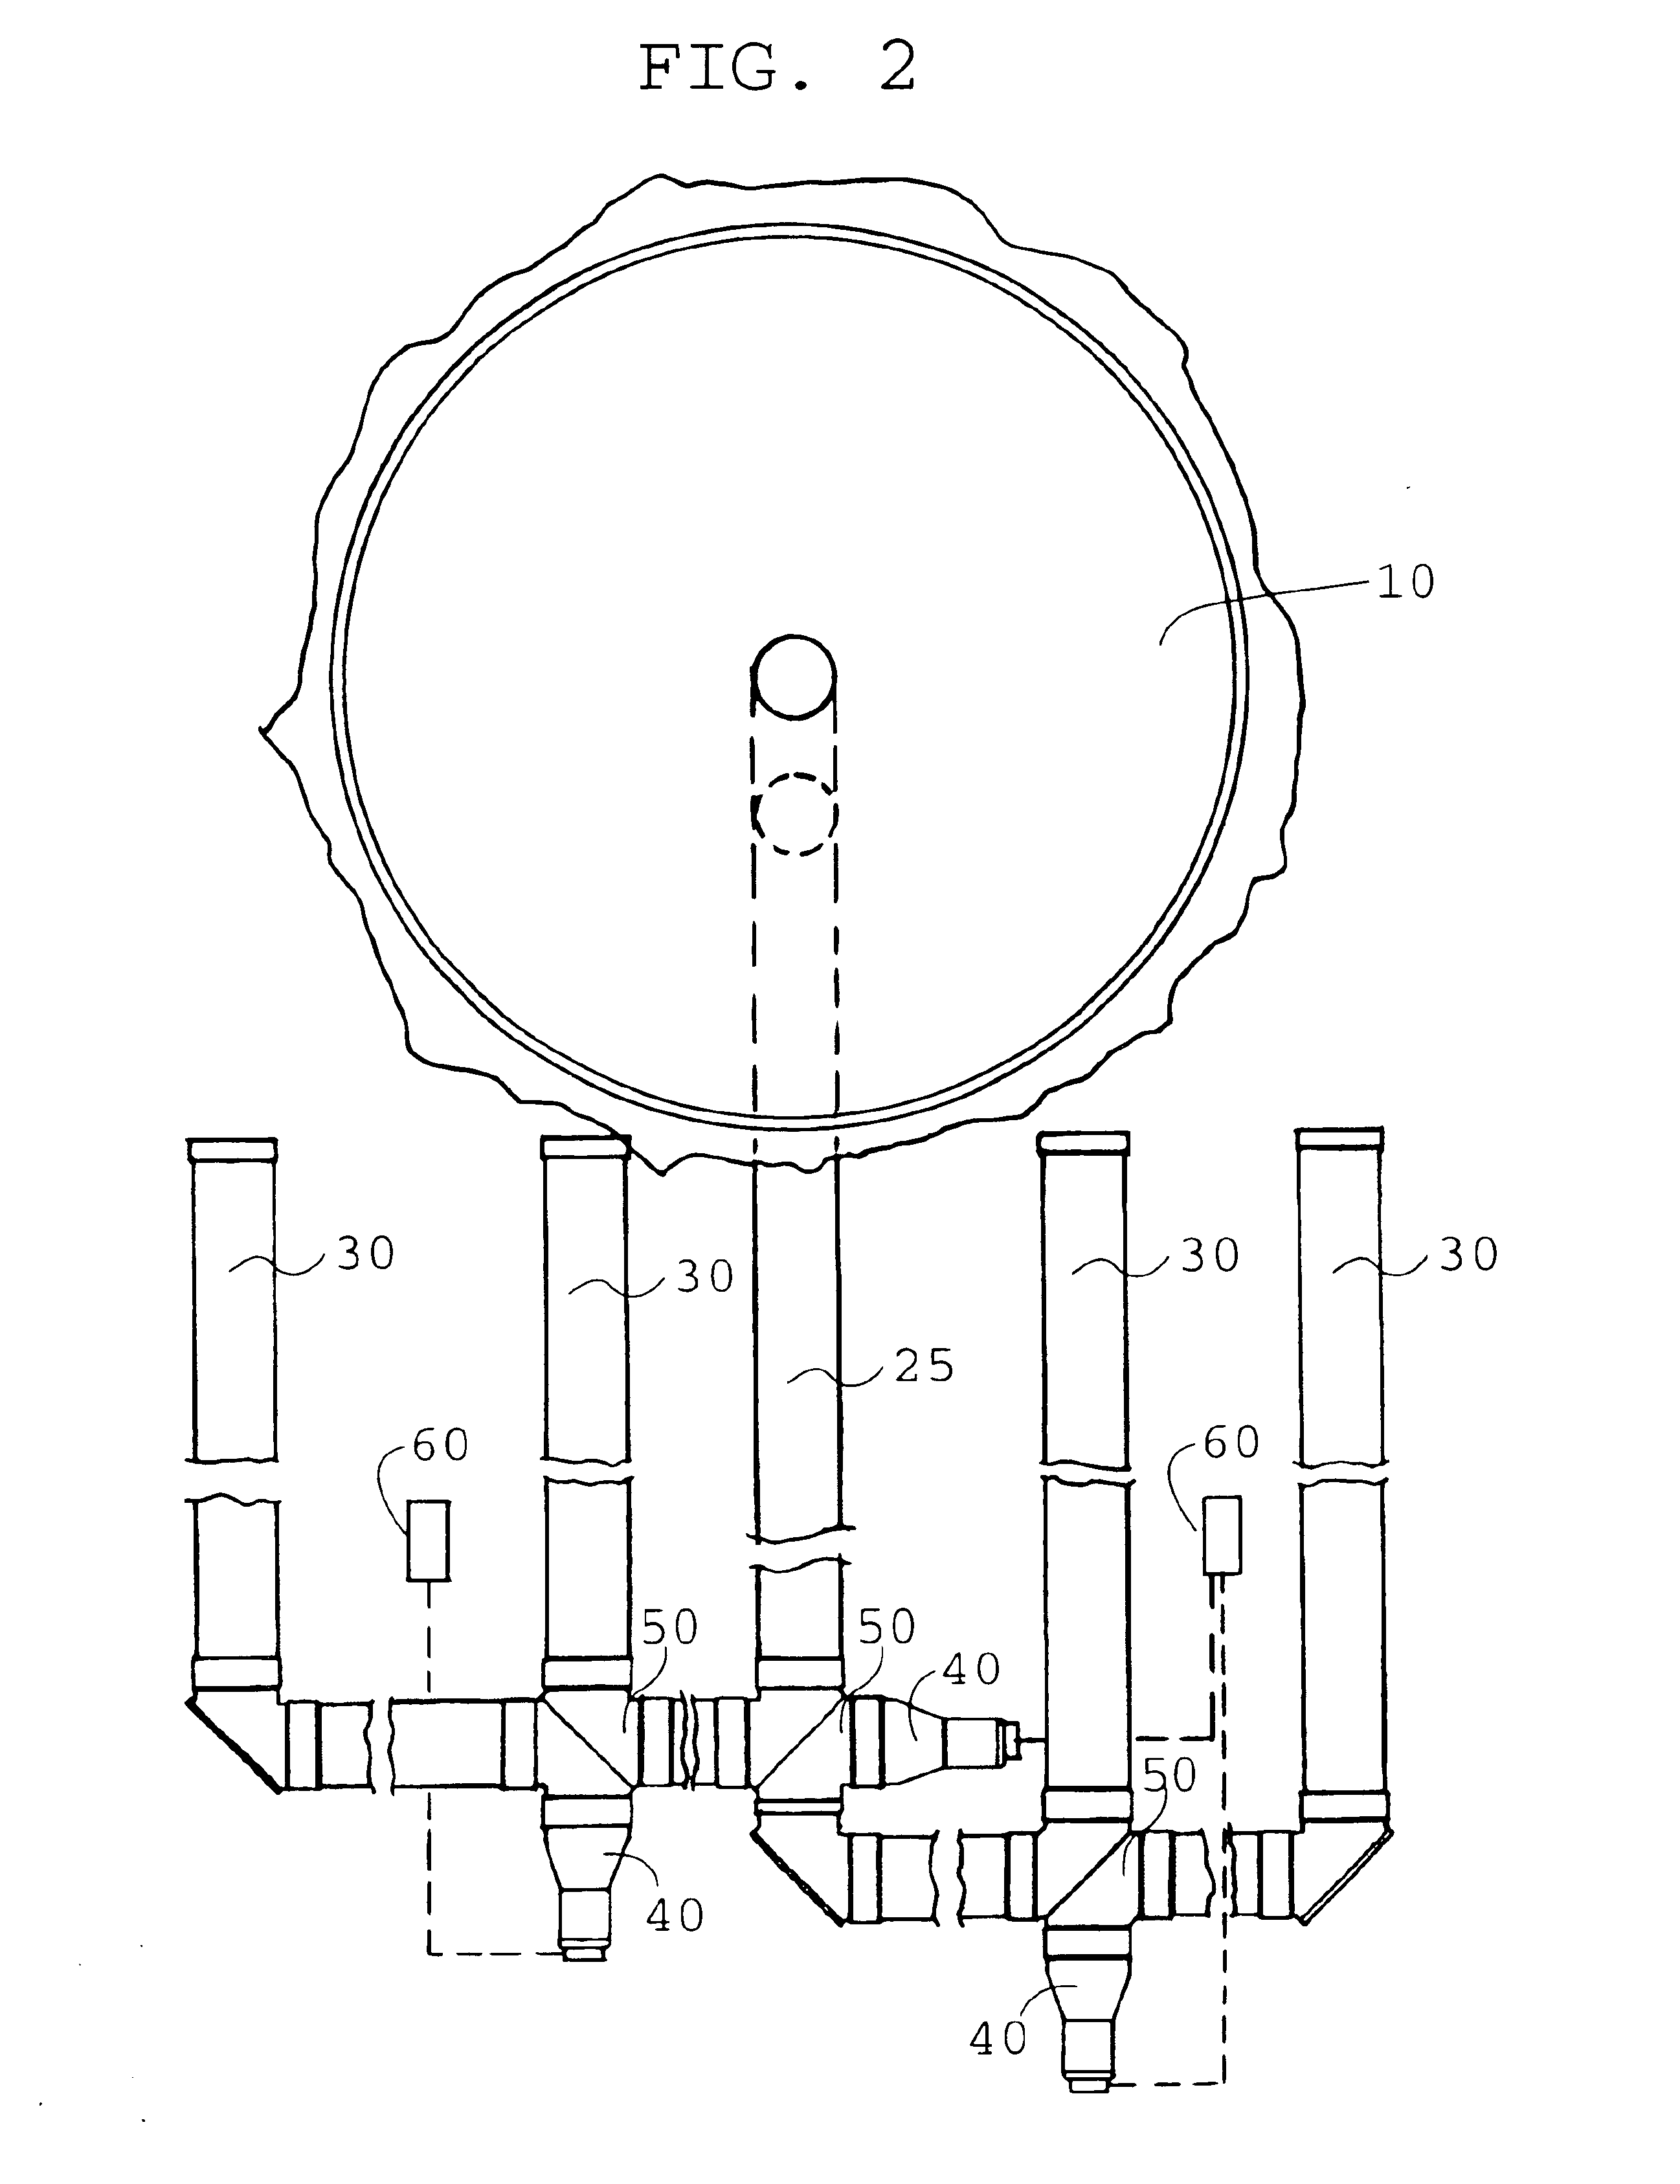 Light tube system for distributing sunlight or artificial light singly or in combination